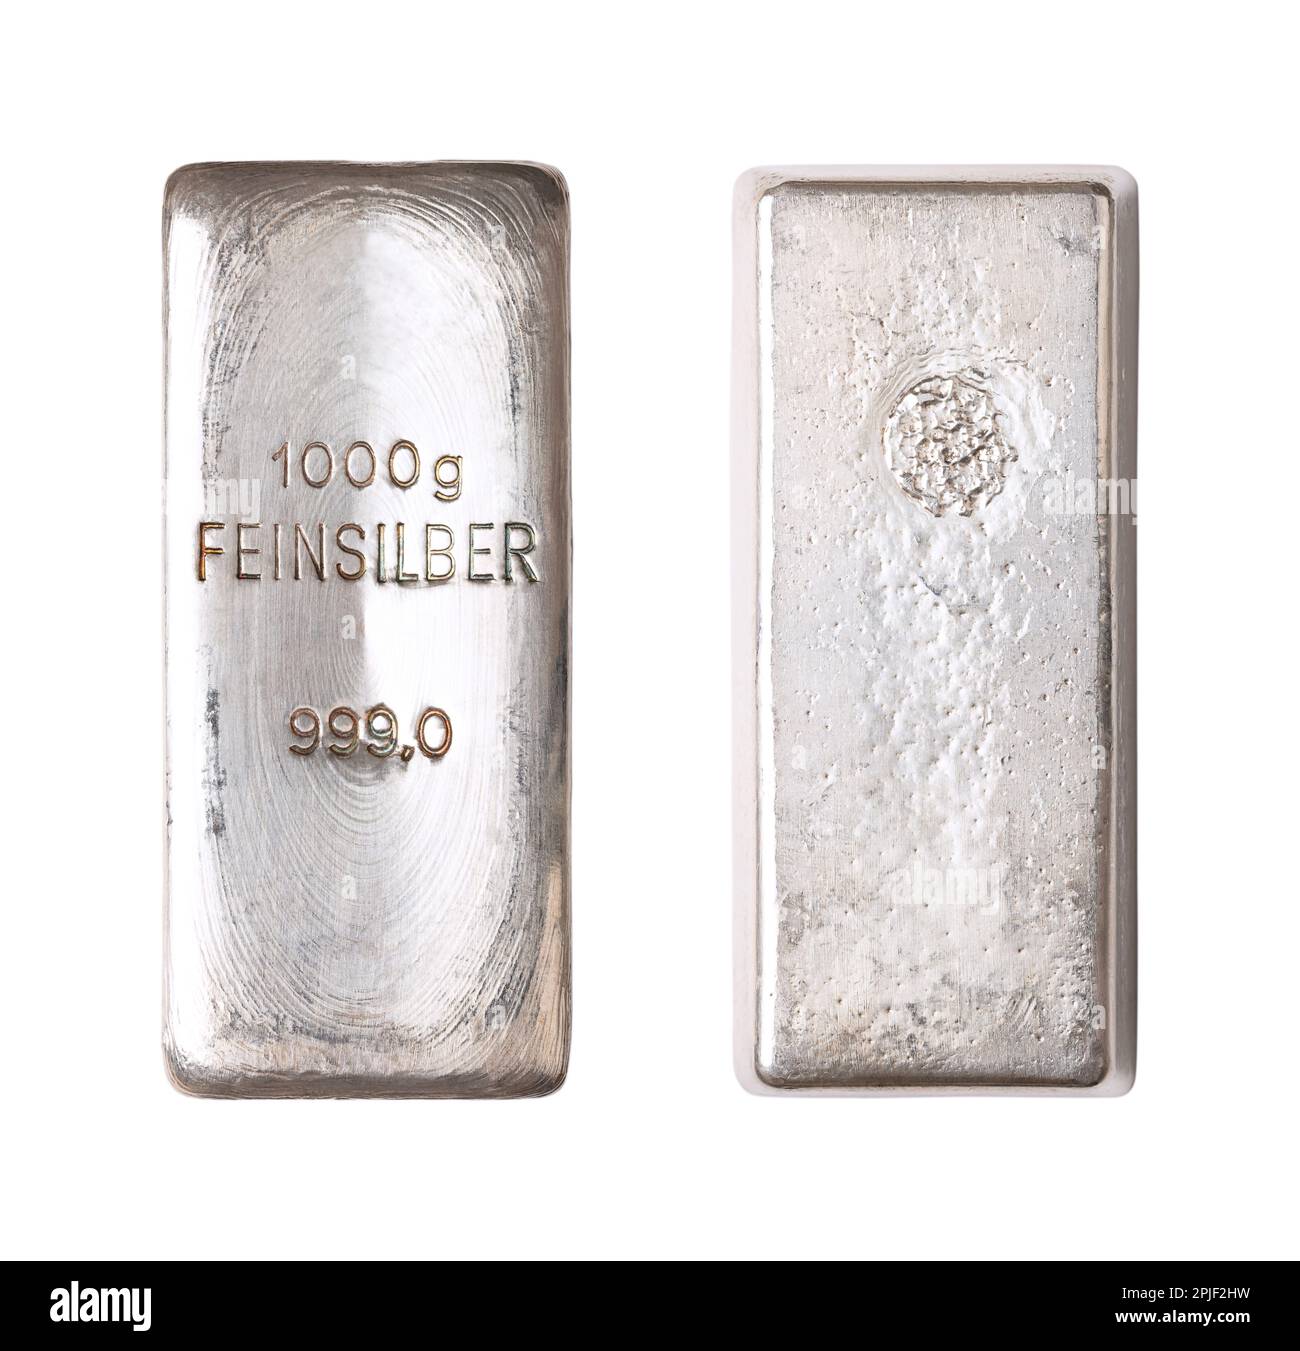 Silver bar, front and back side, isolated from above. Cast silver ingot of 1000 gram, about 32 troy oz of pure metal. Real money, a store of value. Stock Photo